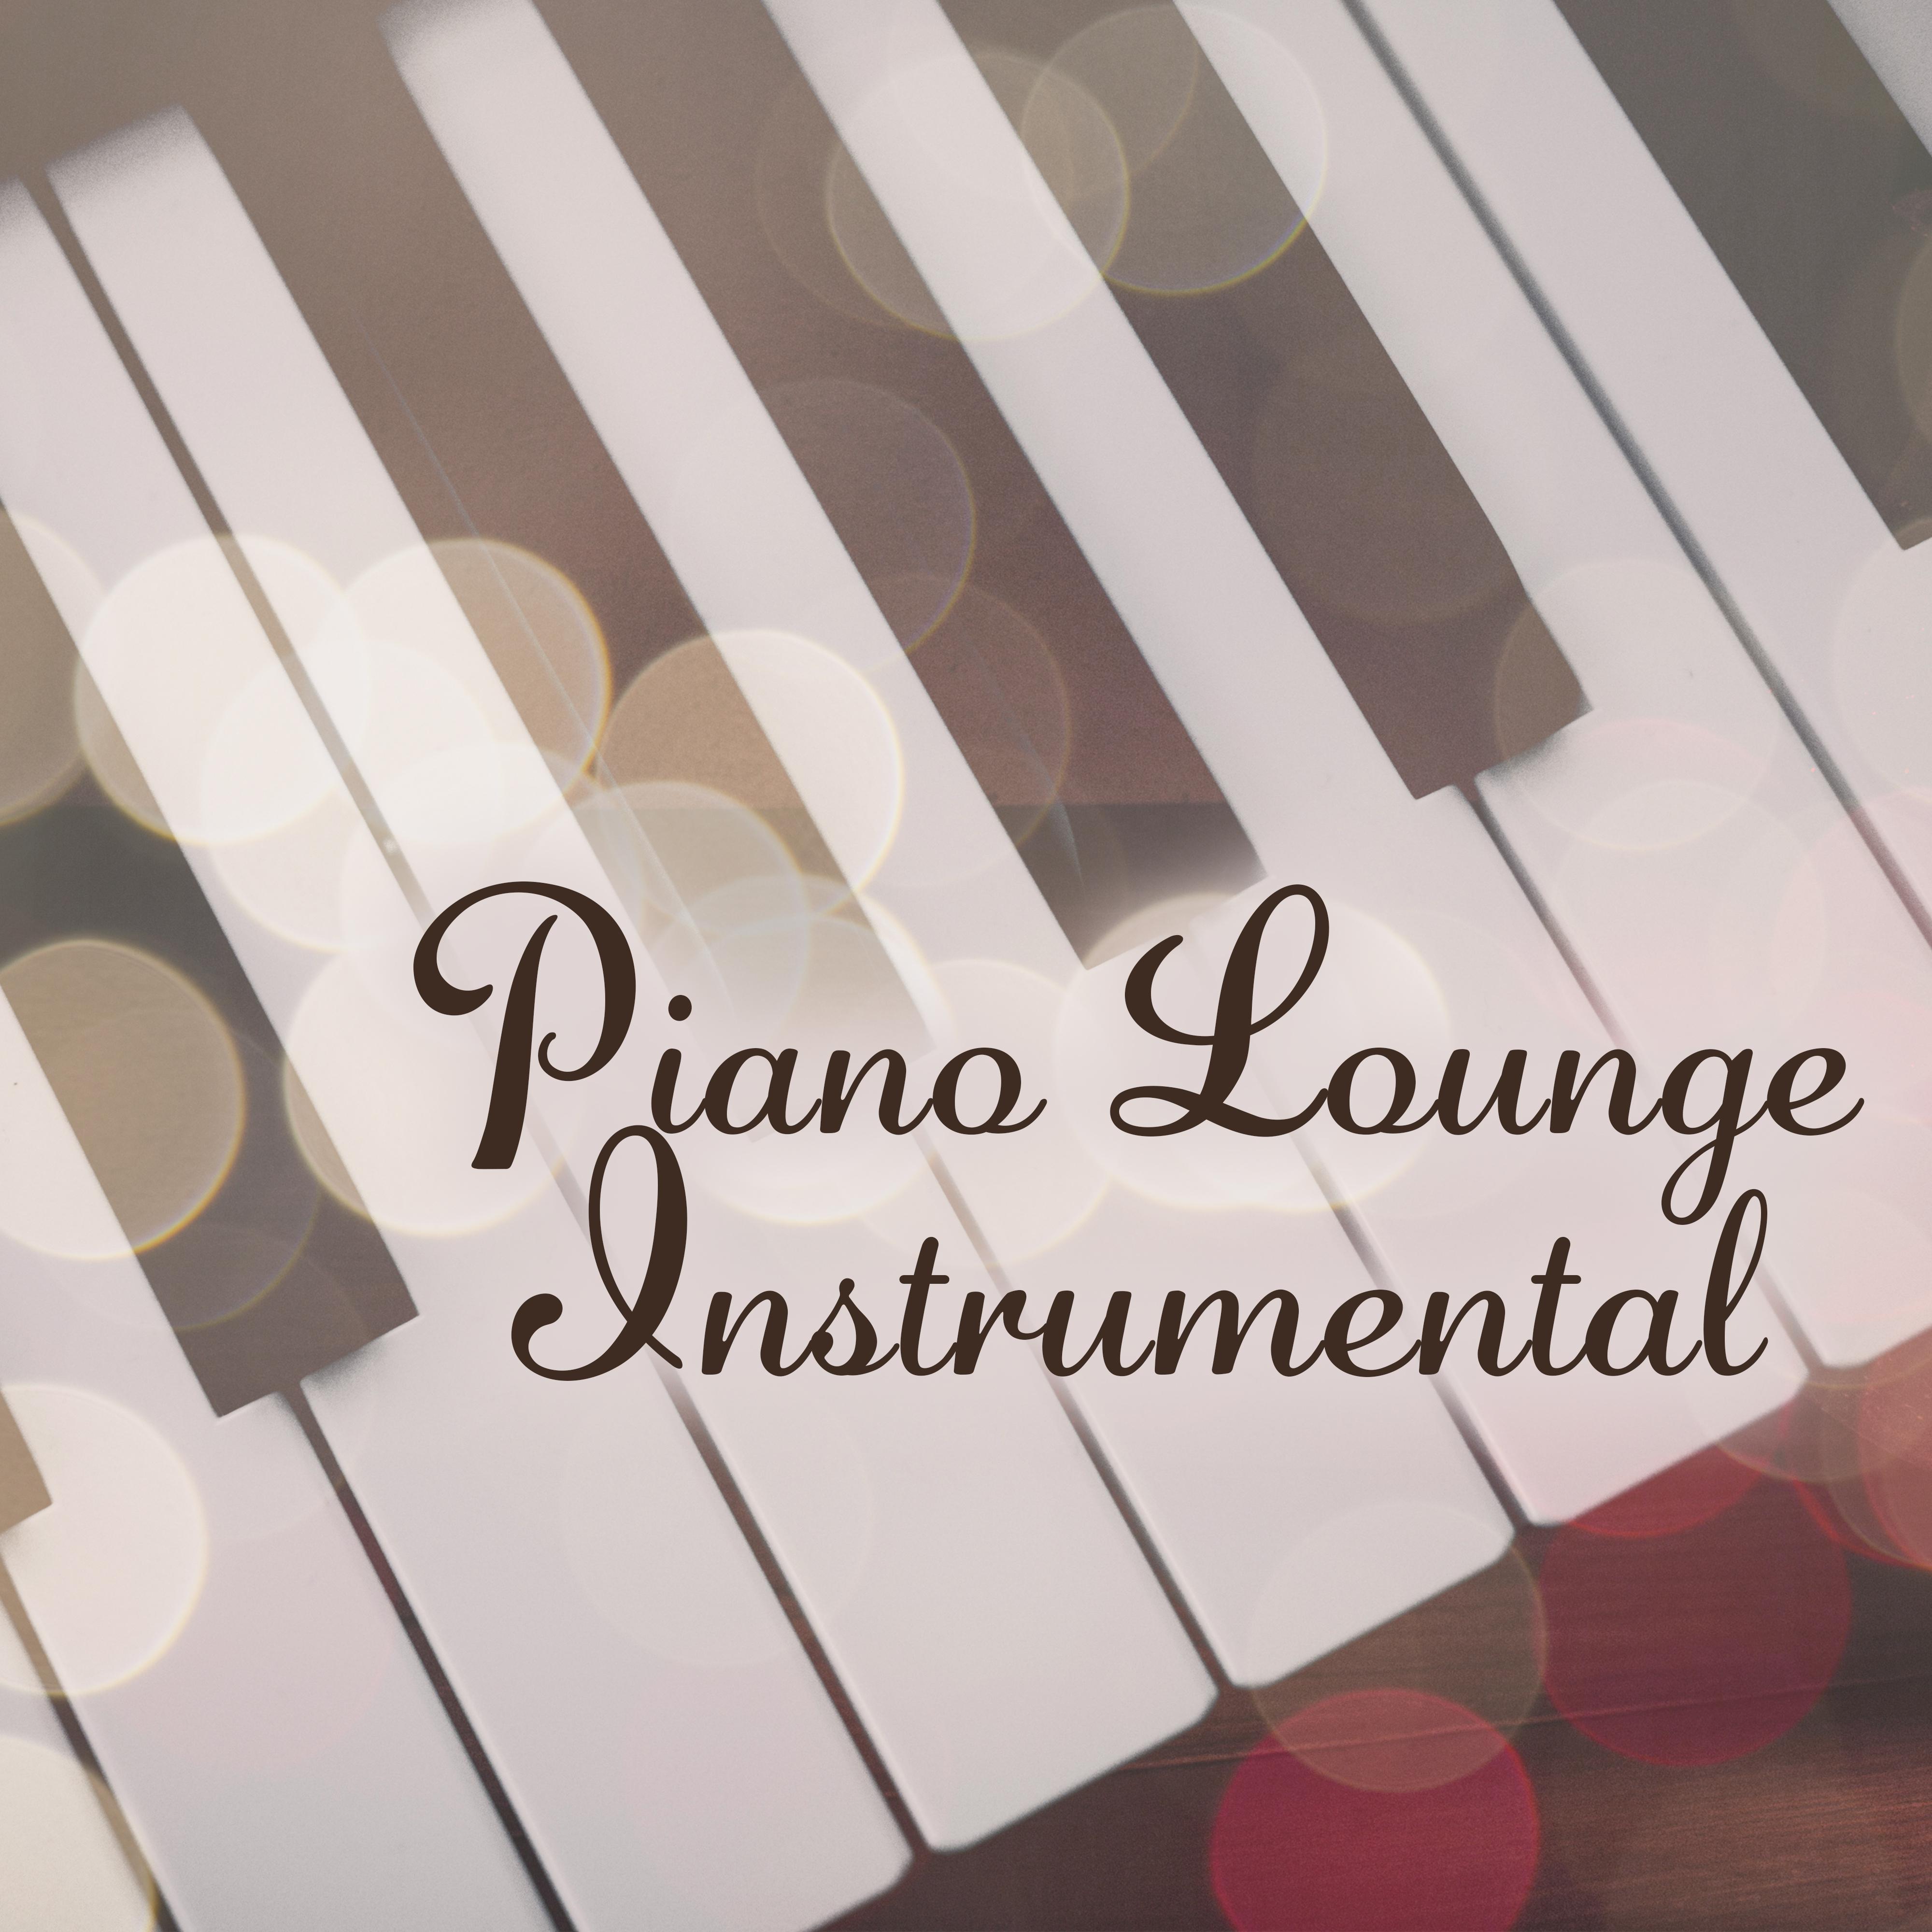 Piano Lounge Instrumental – Easy Listening Music, Mellow Jazz Sounds, Jazz Lounge, Simple Piano